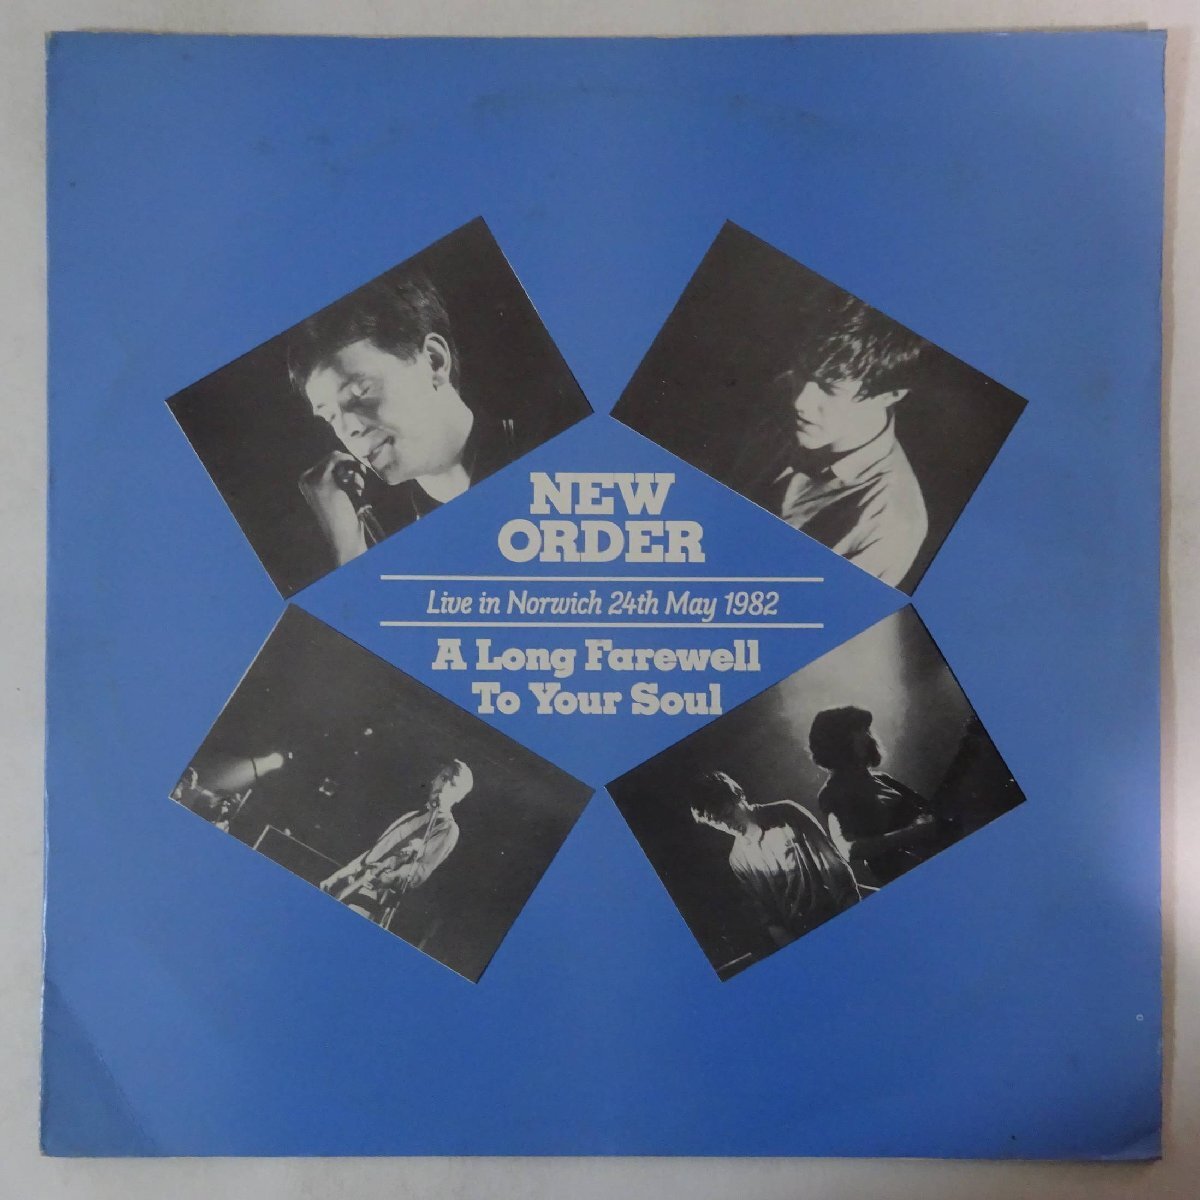 14030366;【BOOT】New Order / A Long Farewell To Your Soul (Live In Norwich 24th May 1982)_画像1